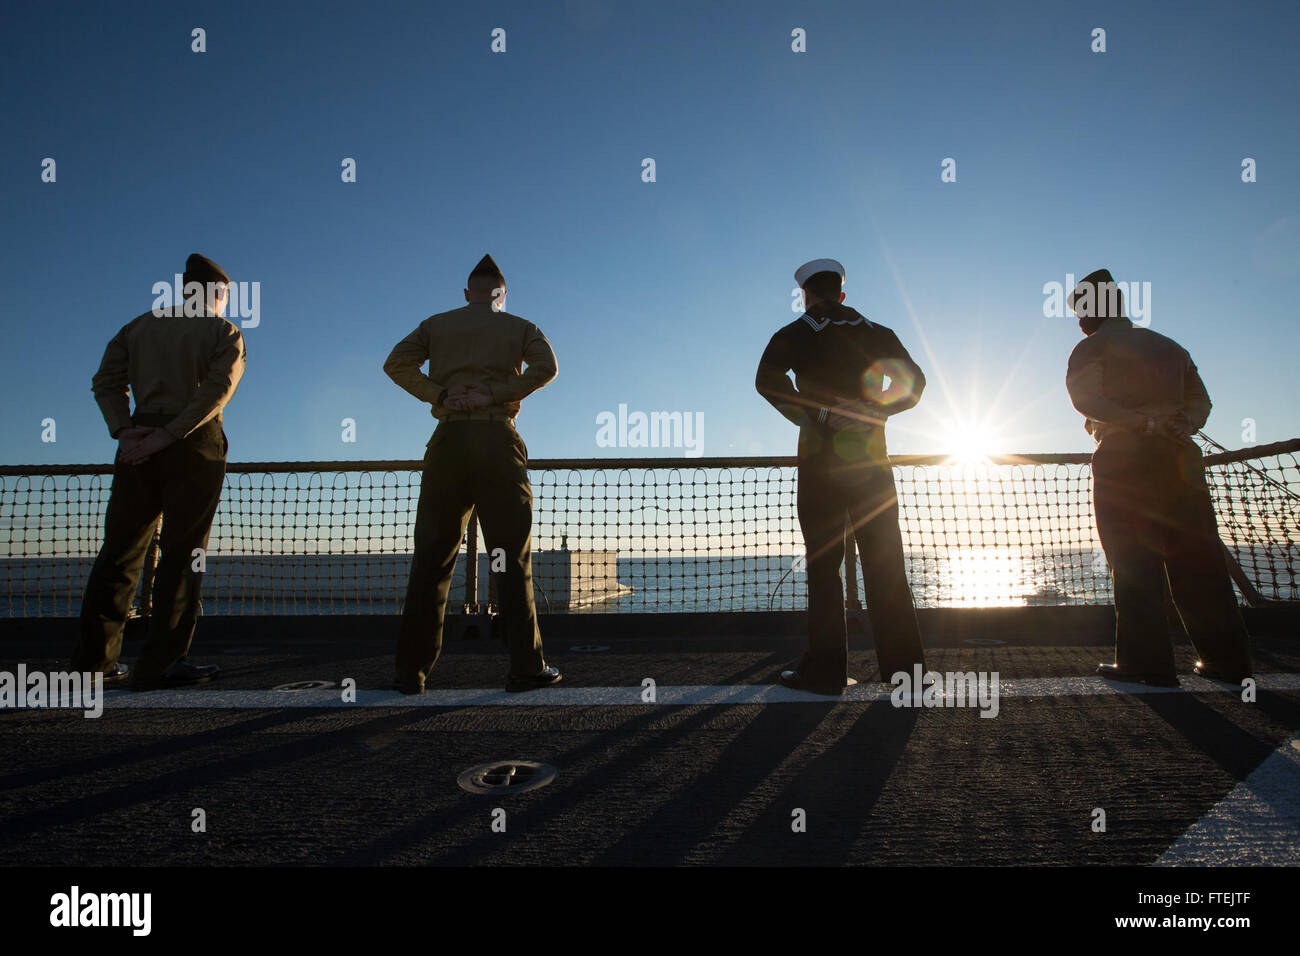 VALENCIA, Spain (Dec. 29, 2014) Marines and a Sailor with the 24th Marine Expeditionary Unit and Iwo Jima Amphibious Ready Group man the rails aboard USS Fort McHenry (LSD 43) Dec. 29, 2014. The Marines and Sailors pulled into Valencia, Spain, for a port visit over the New Year holiday. The 24th MEU and Iwo Jima ARG are conducting naval operations in the U.S. 6th Fleet area of operations in support of U.S. national security interests in Europe. Stock Photo